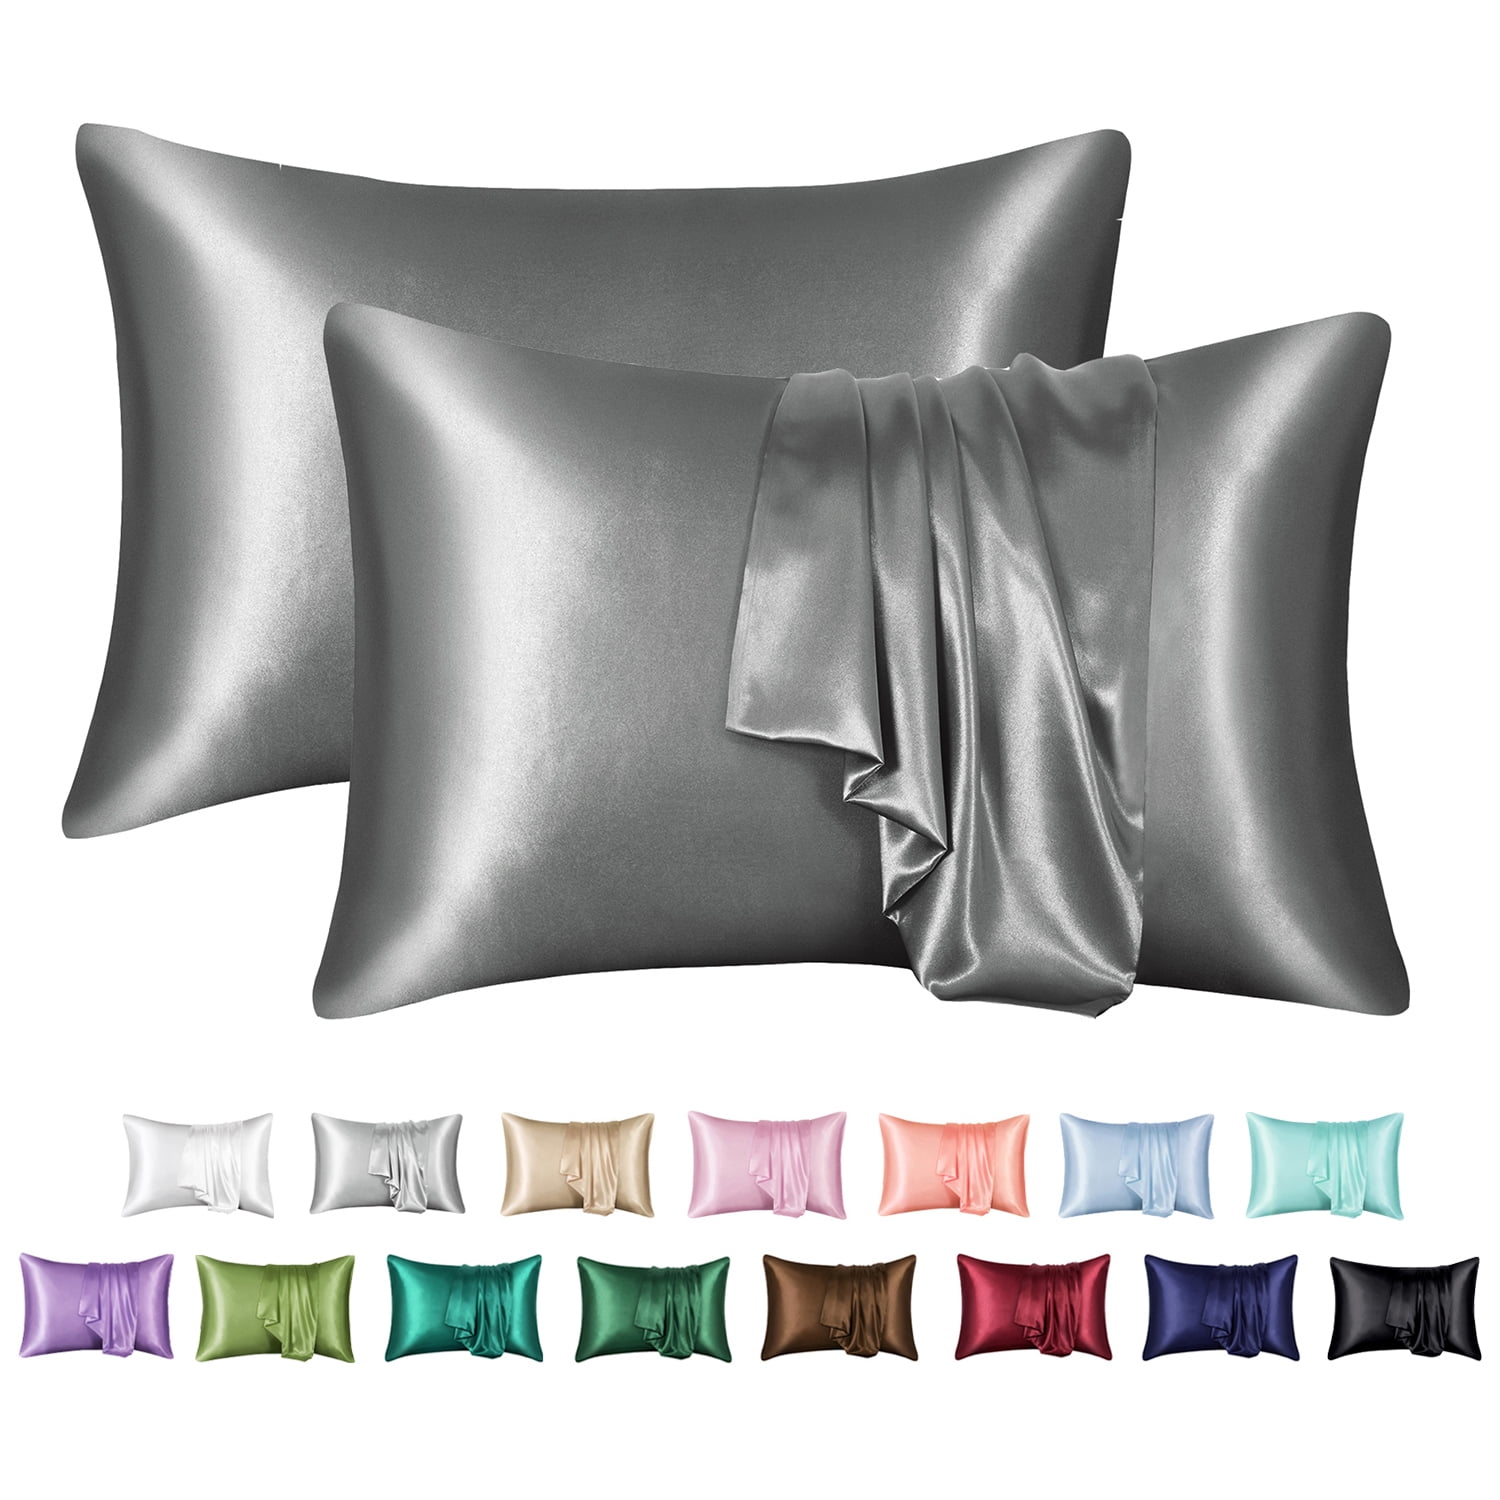 Details about   Slip Cooling Satin Pillow Cases Cover for Hair and Skin No Zipper Pillowcase 